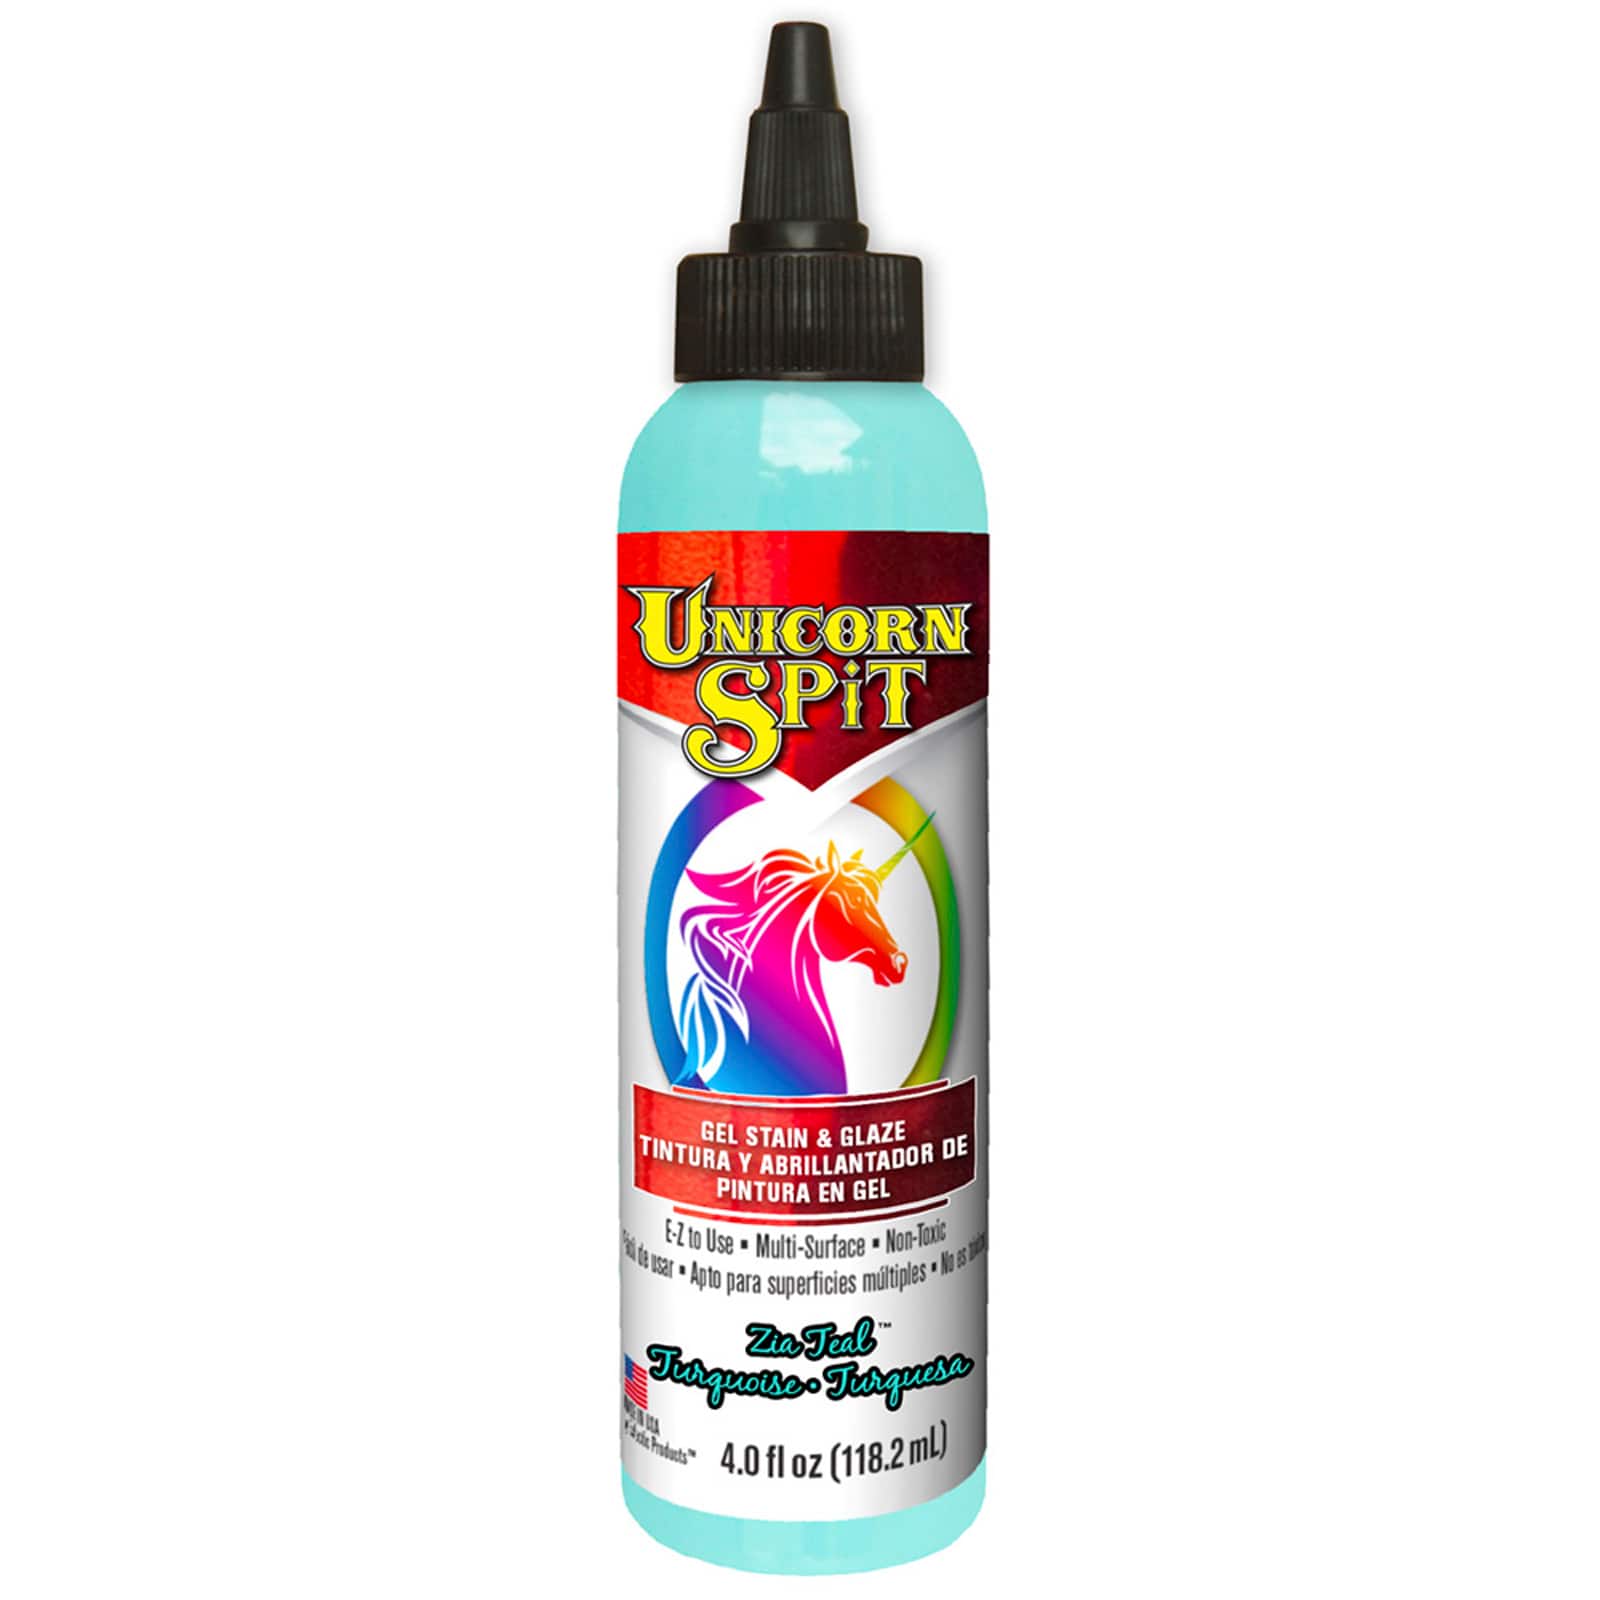 Unicorn Spit Gel Stain & Glaze, 4 oz by Eclectic Products in Midnight's Blackness | Michaels